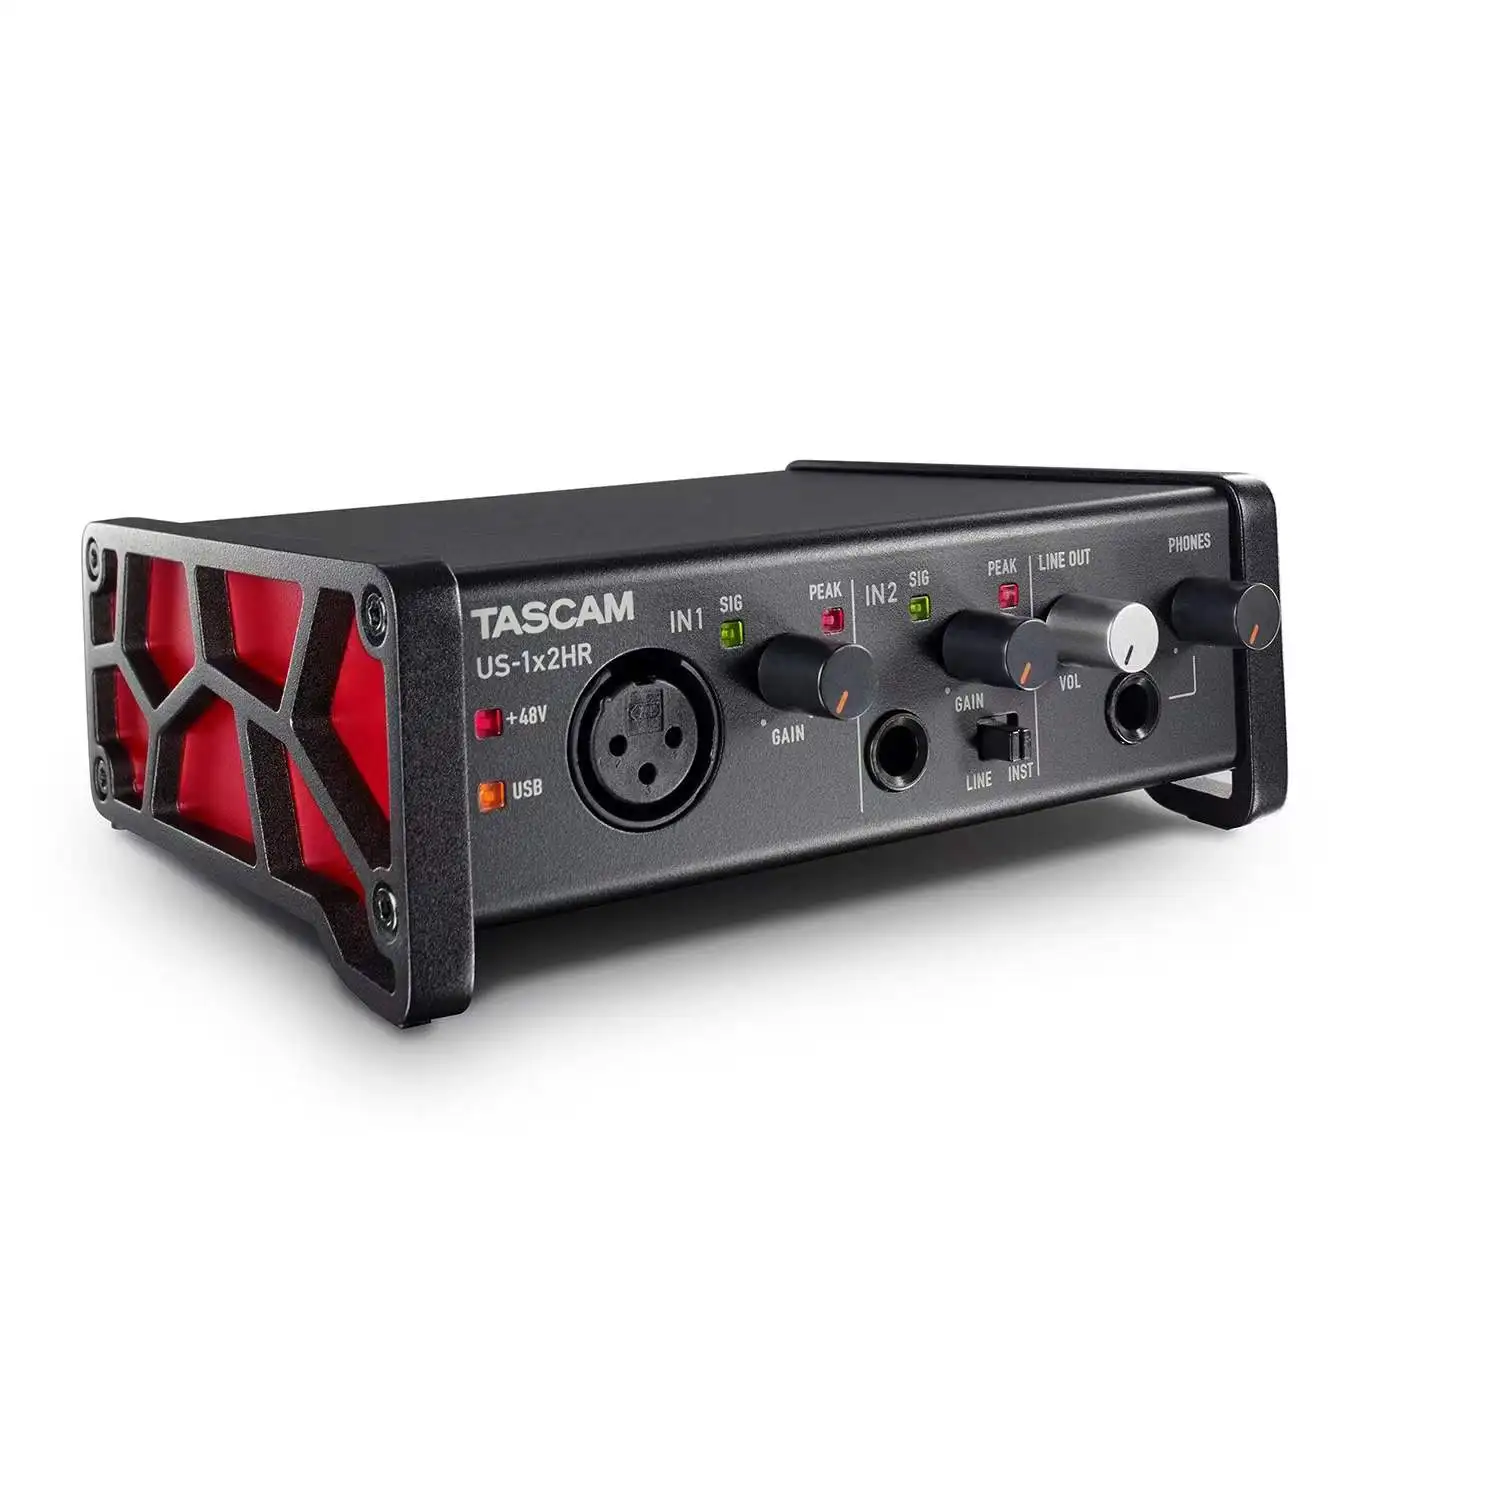 

New Us-1x2 HR us-1x2HR high resolution versatile USB audio interface with 2 inputs (1 mic /1 line) for recording musician